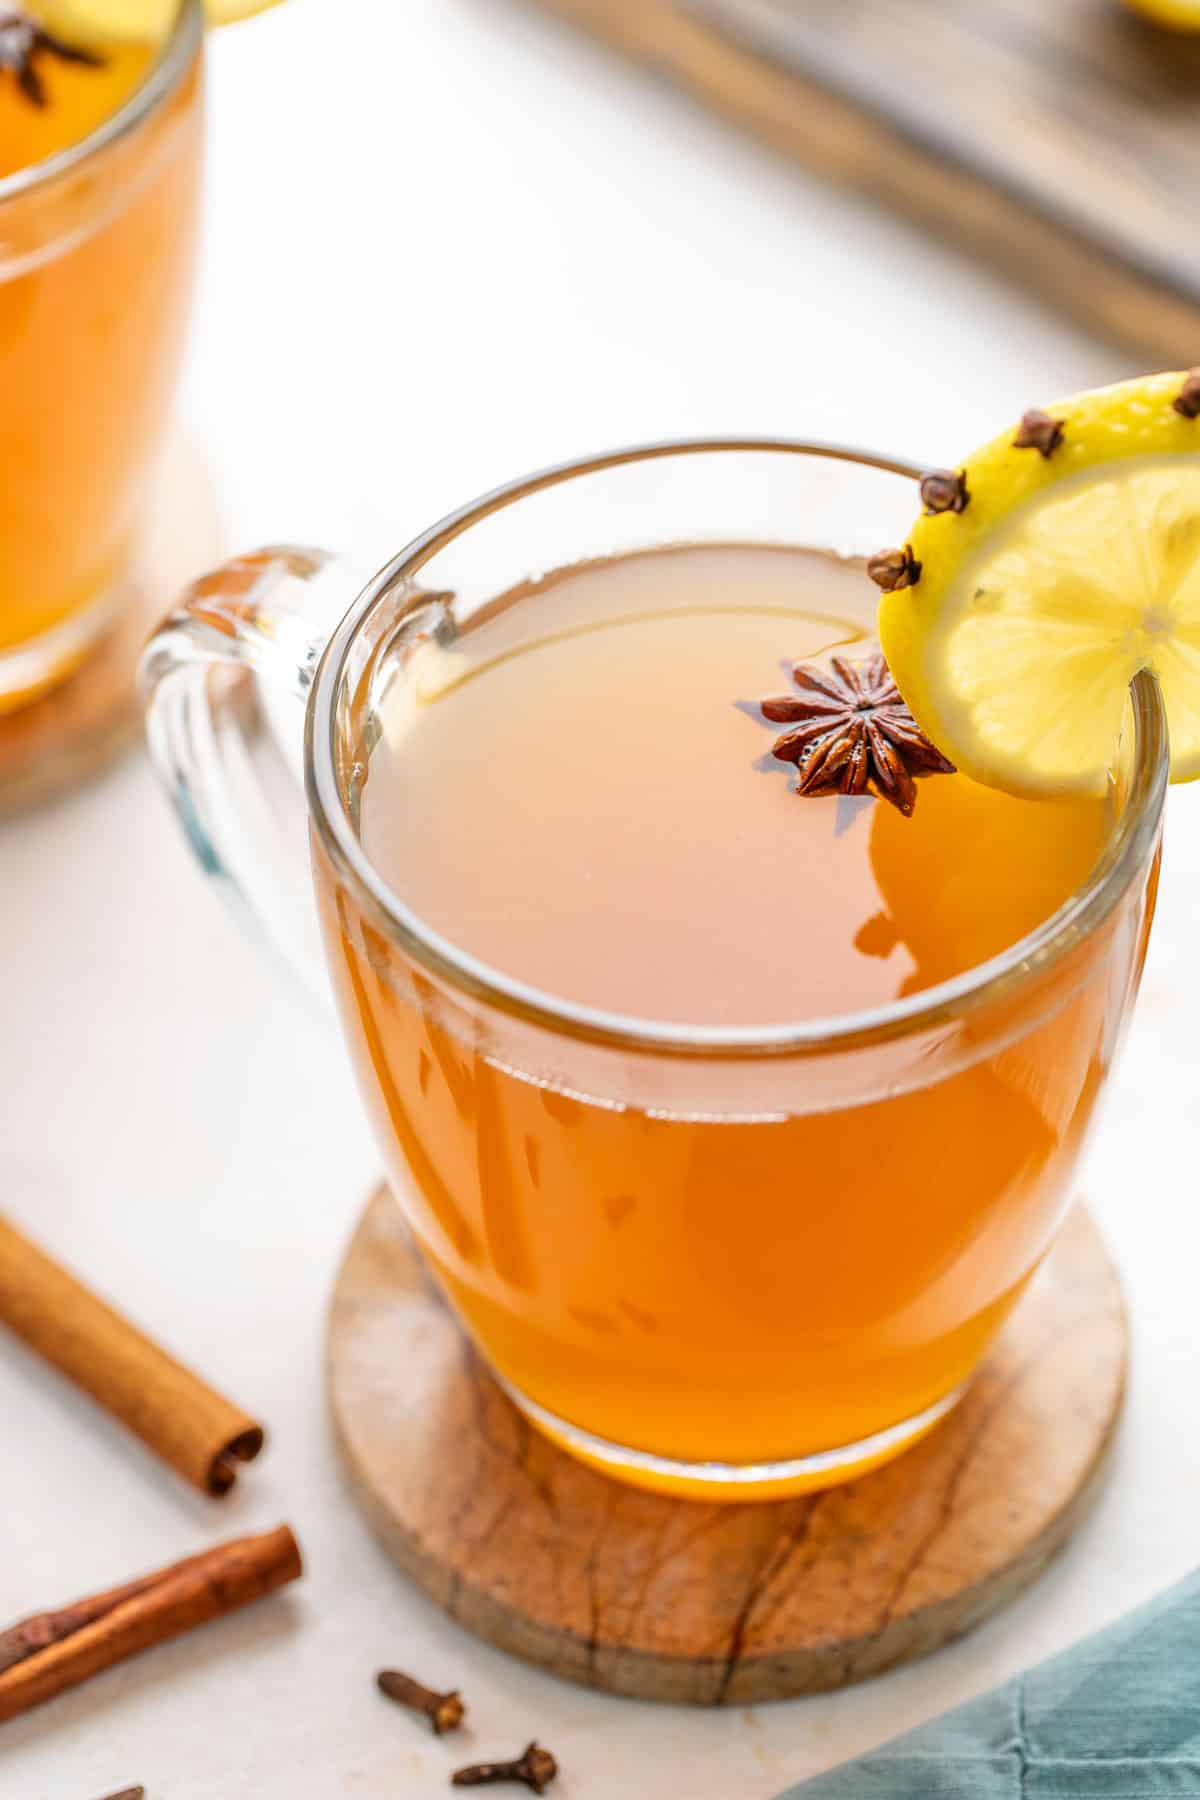 Angled view of a hot toddy drink in a clear glass mug garnished with a clove-studded lemon slice and star anise.